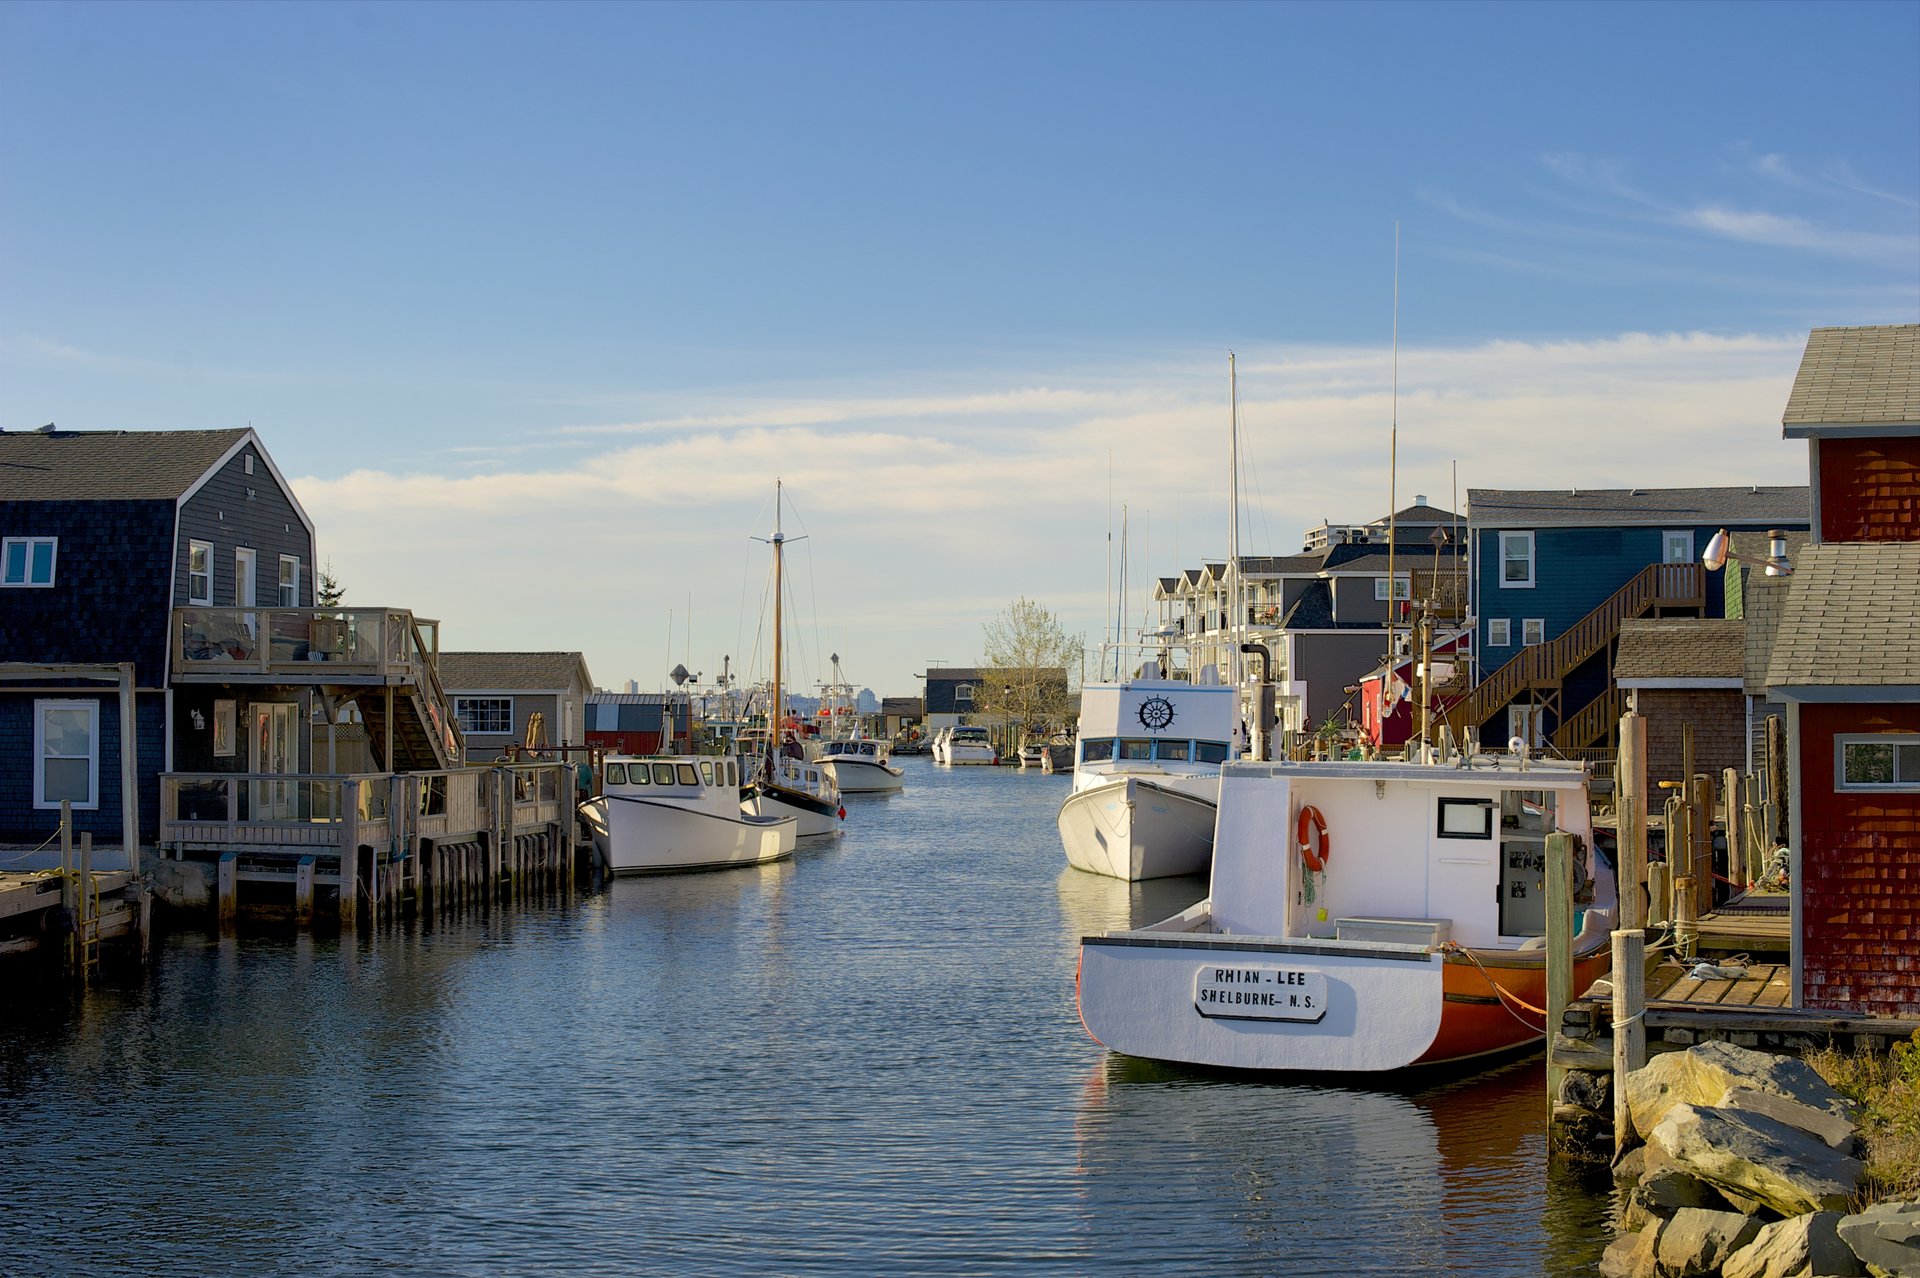 A harbour in Eastern Shore on a sunny day. There are wharves and buildings along the water and white sailboats docked along the boardwalk.